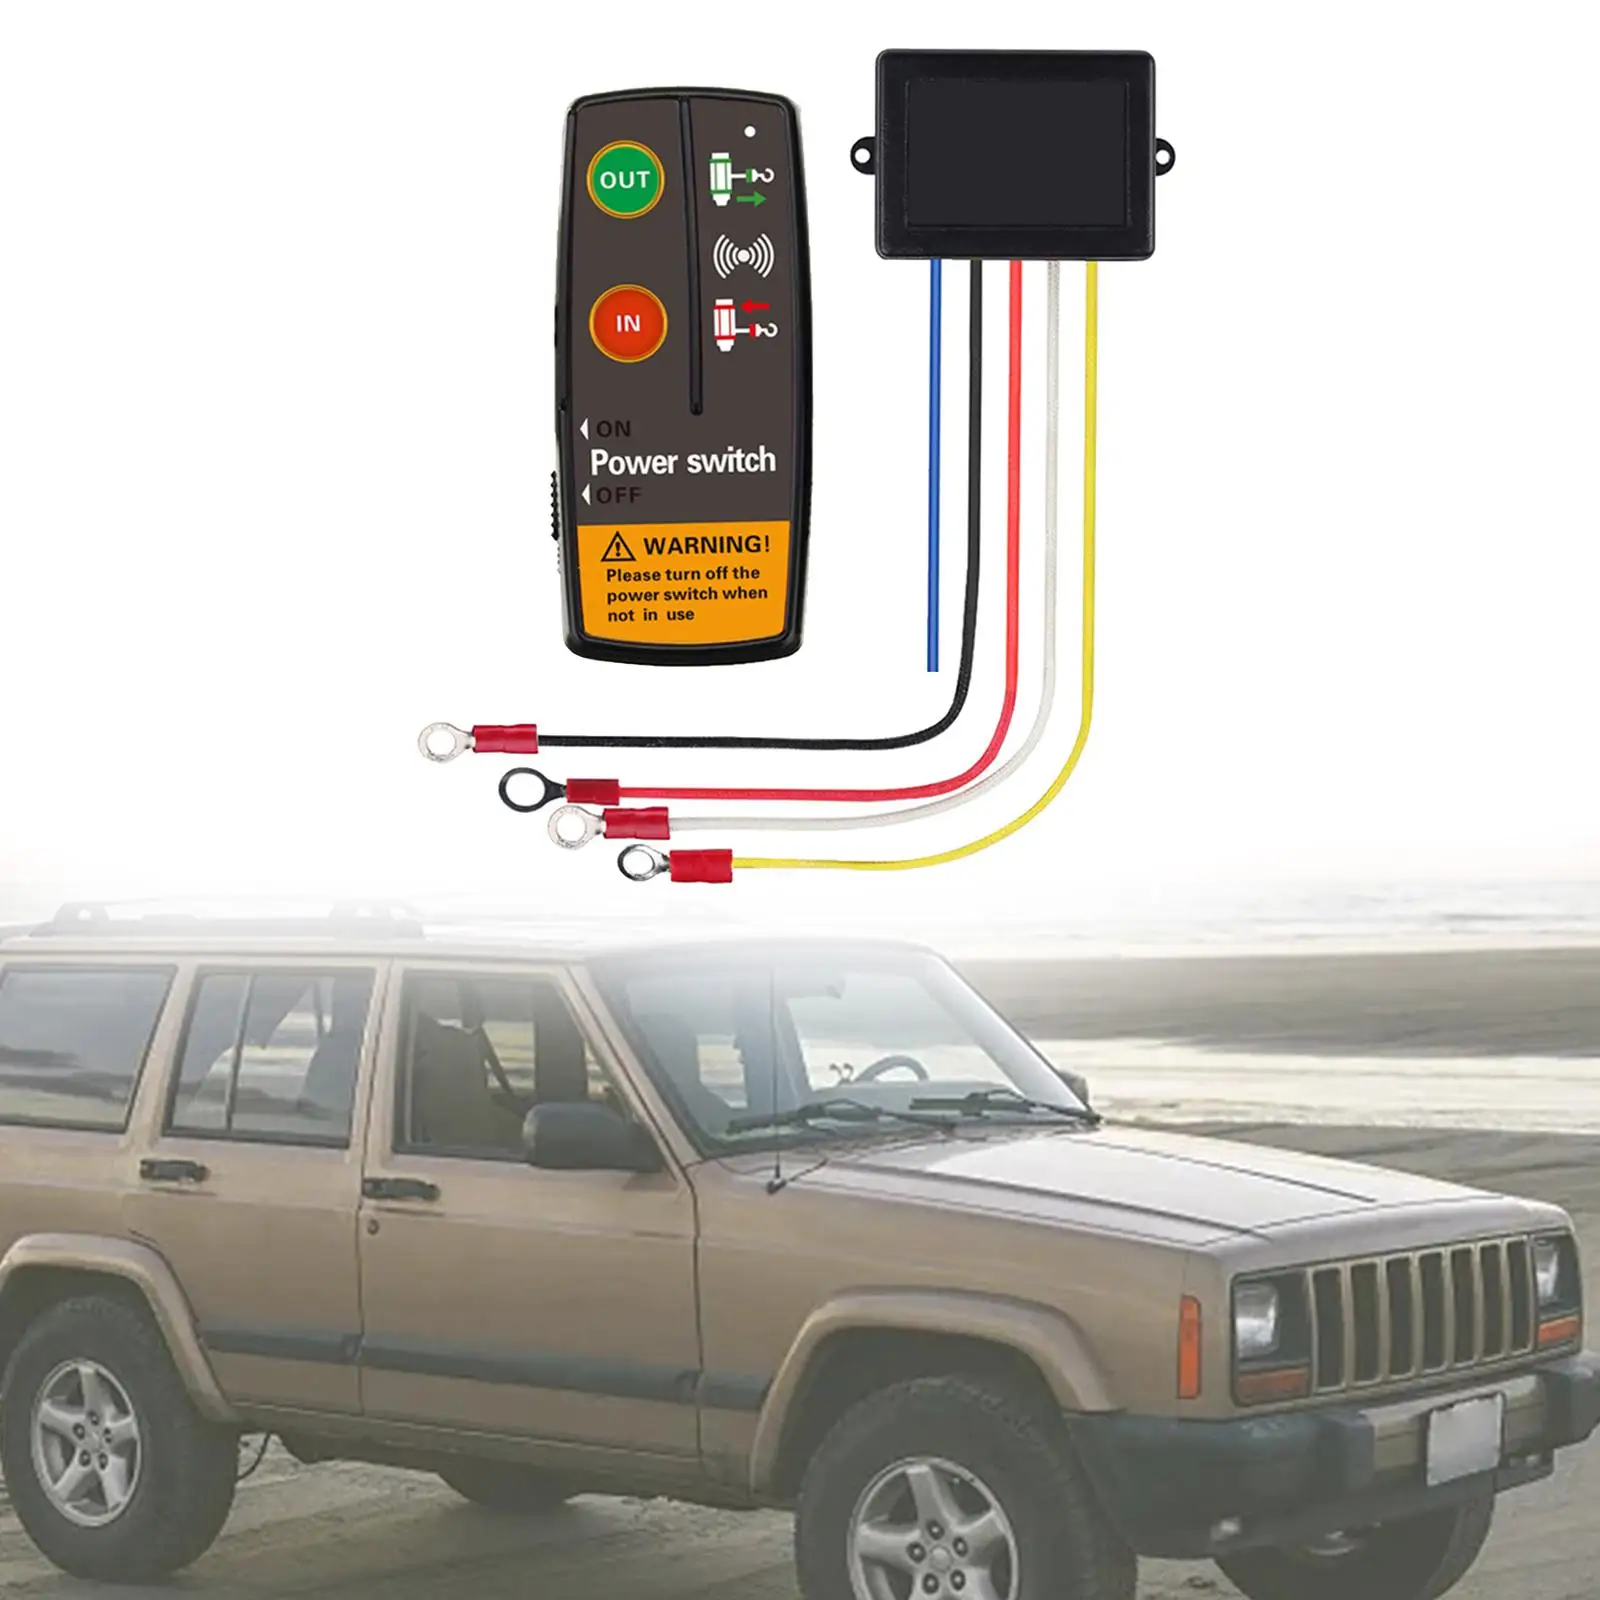 Wireless Winch Remote Control Set Heavy Duty with Indicator Light Durable Long Range Premium Accessories for SUV Car ATV